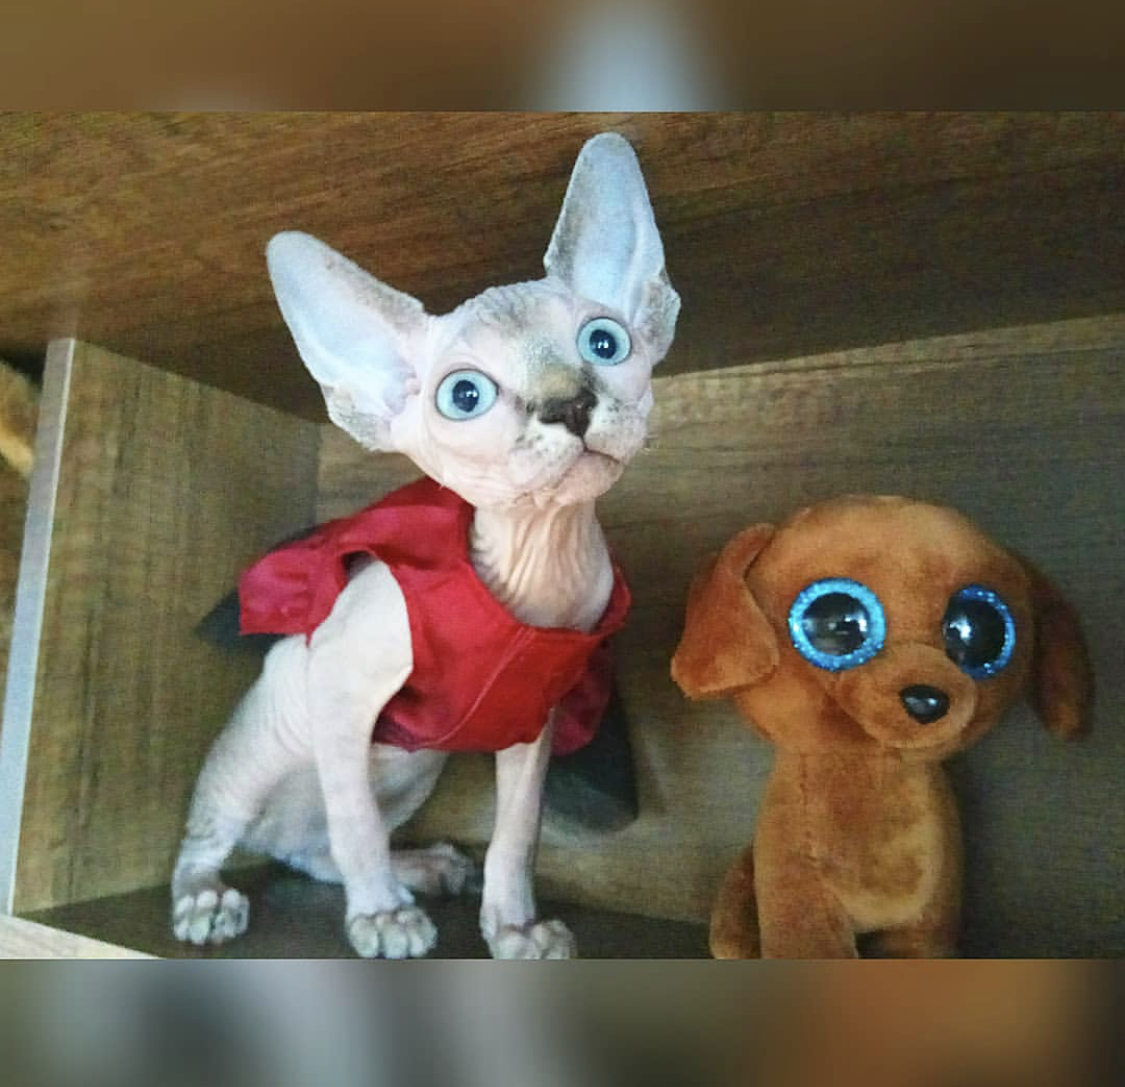 Sphynx sitting in the cabinet next to a puppy stuffed toy